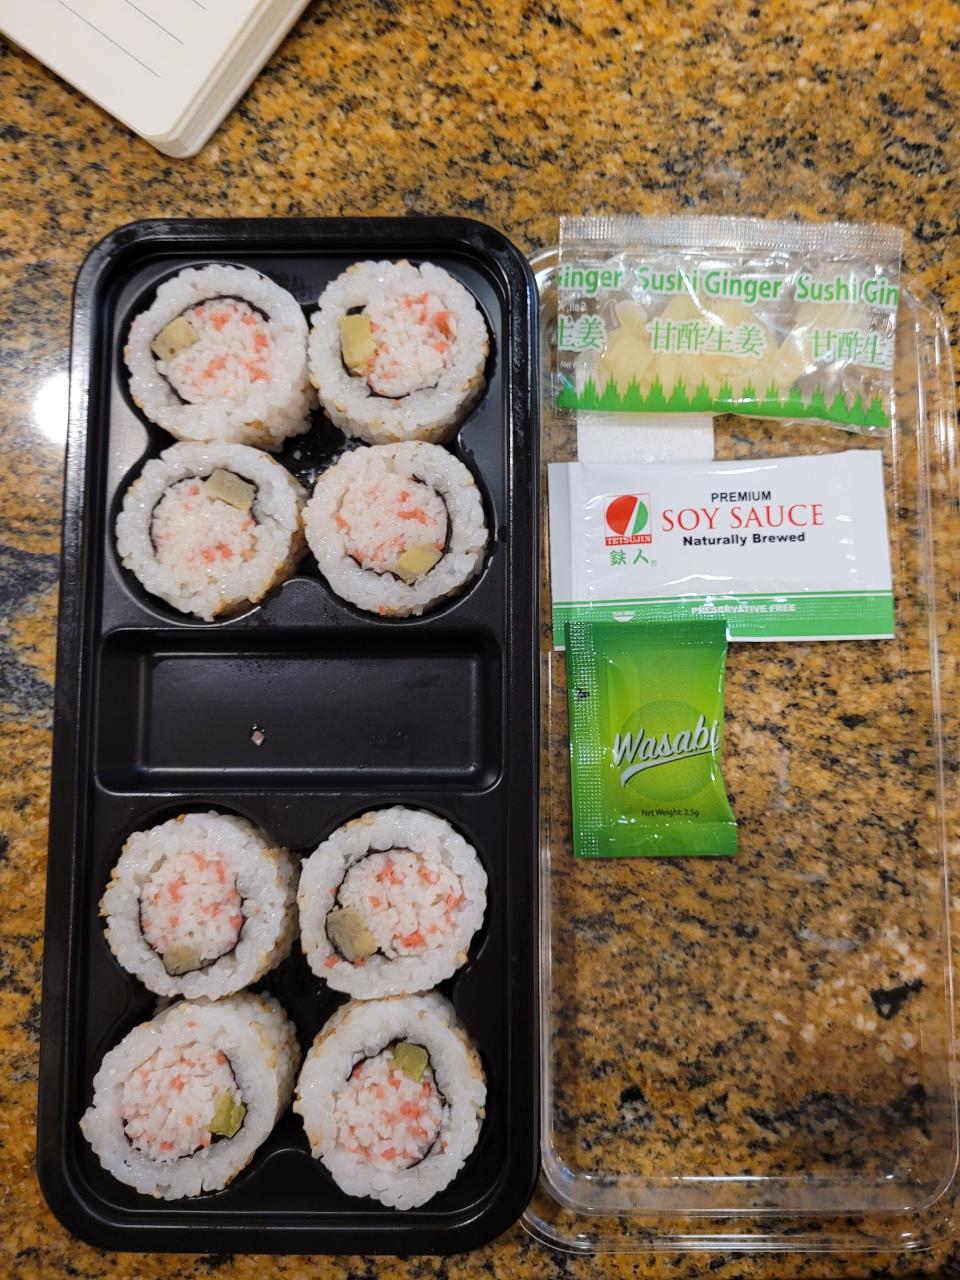 Kwik Trip sells sushi, such as this California Roll, in its prepared food section.